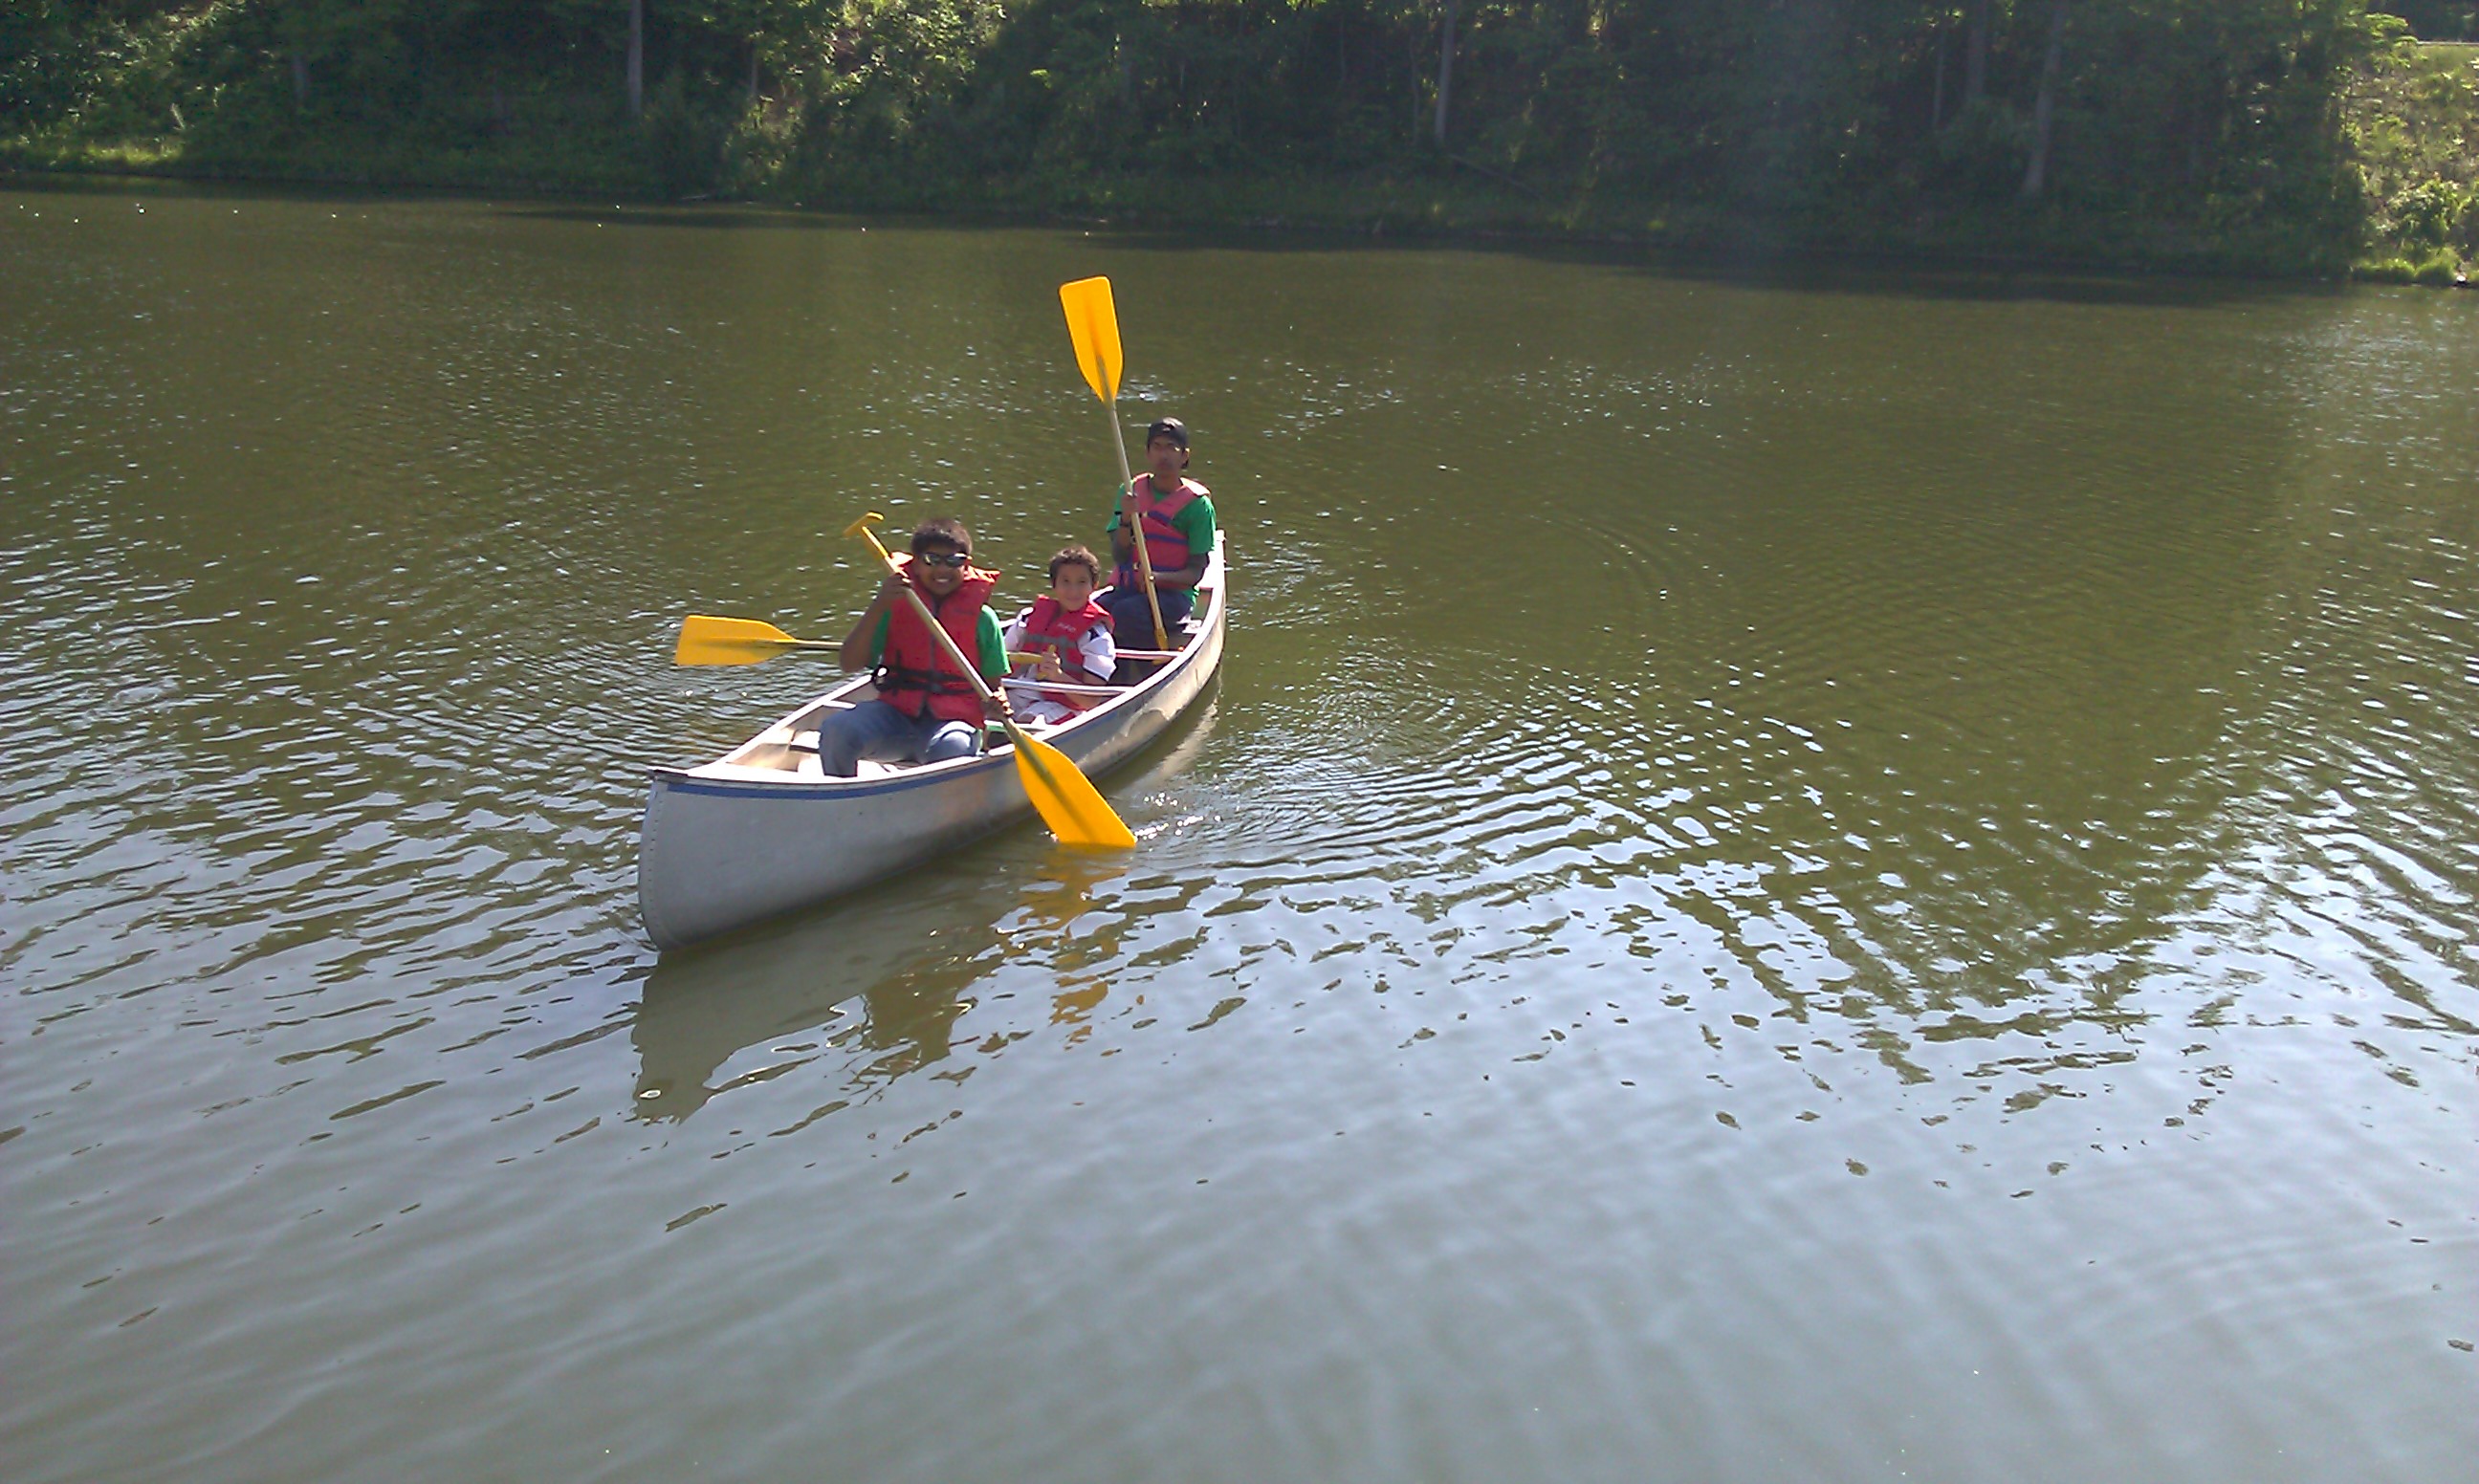 Holy boat: Archive How to steer in a canoe